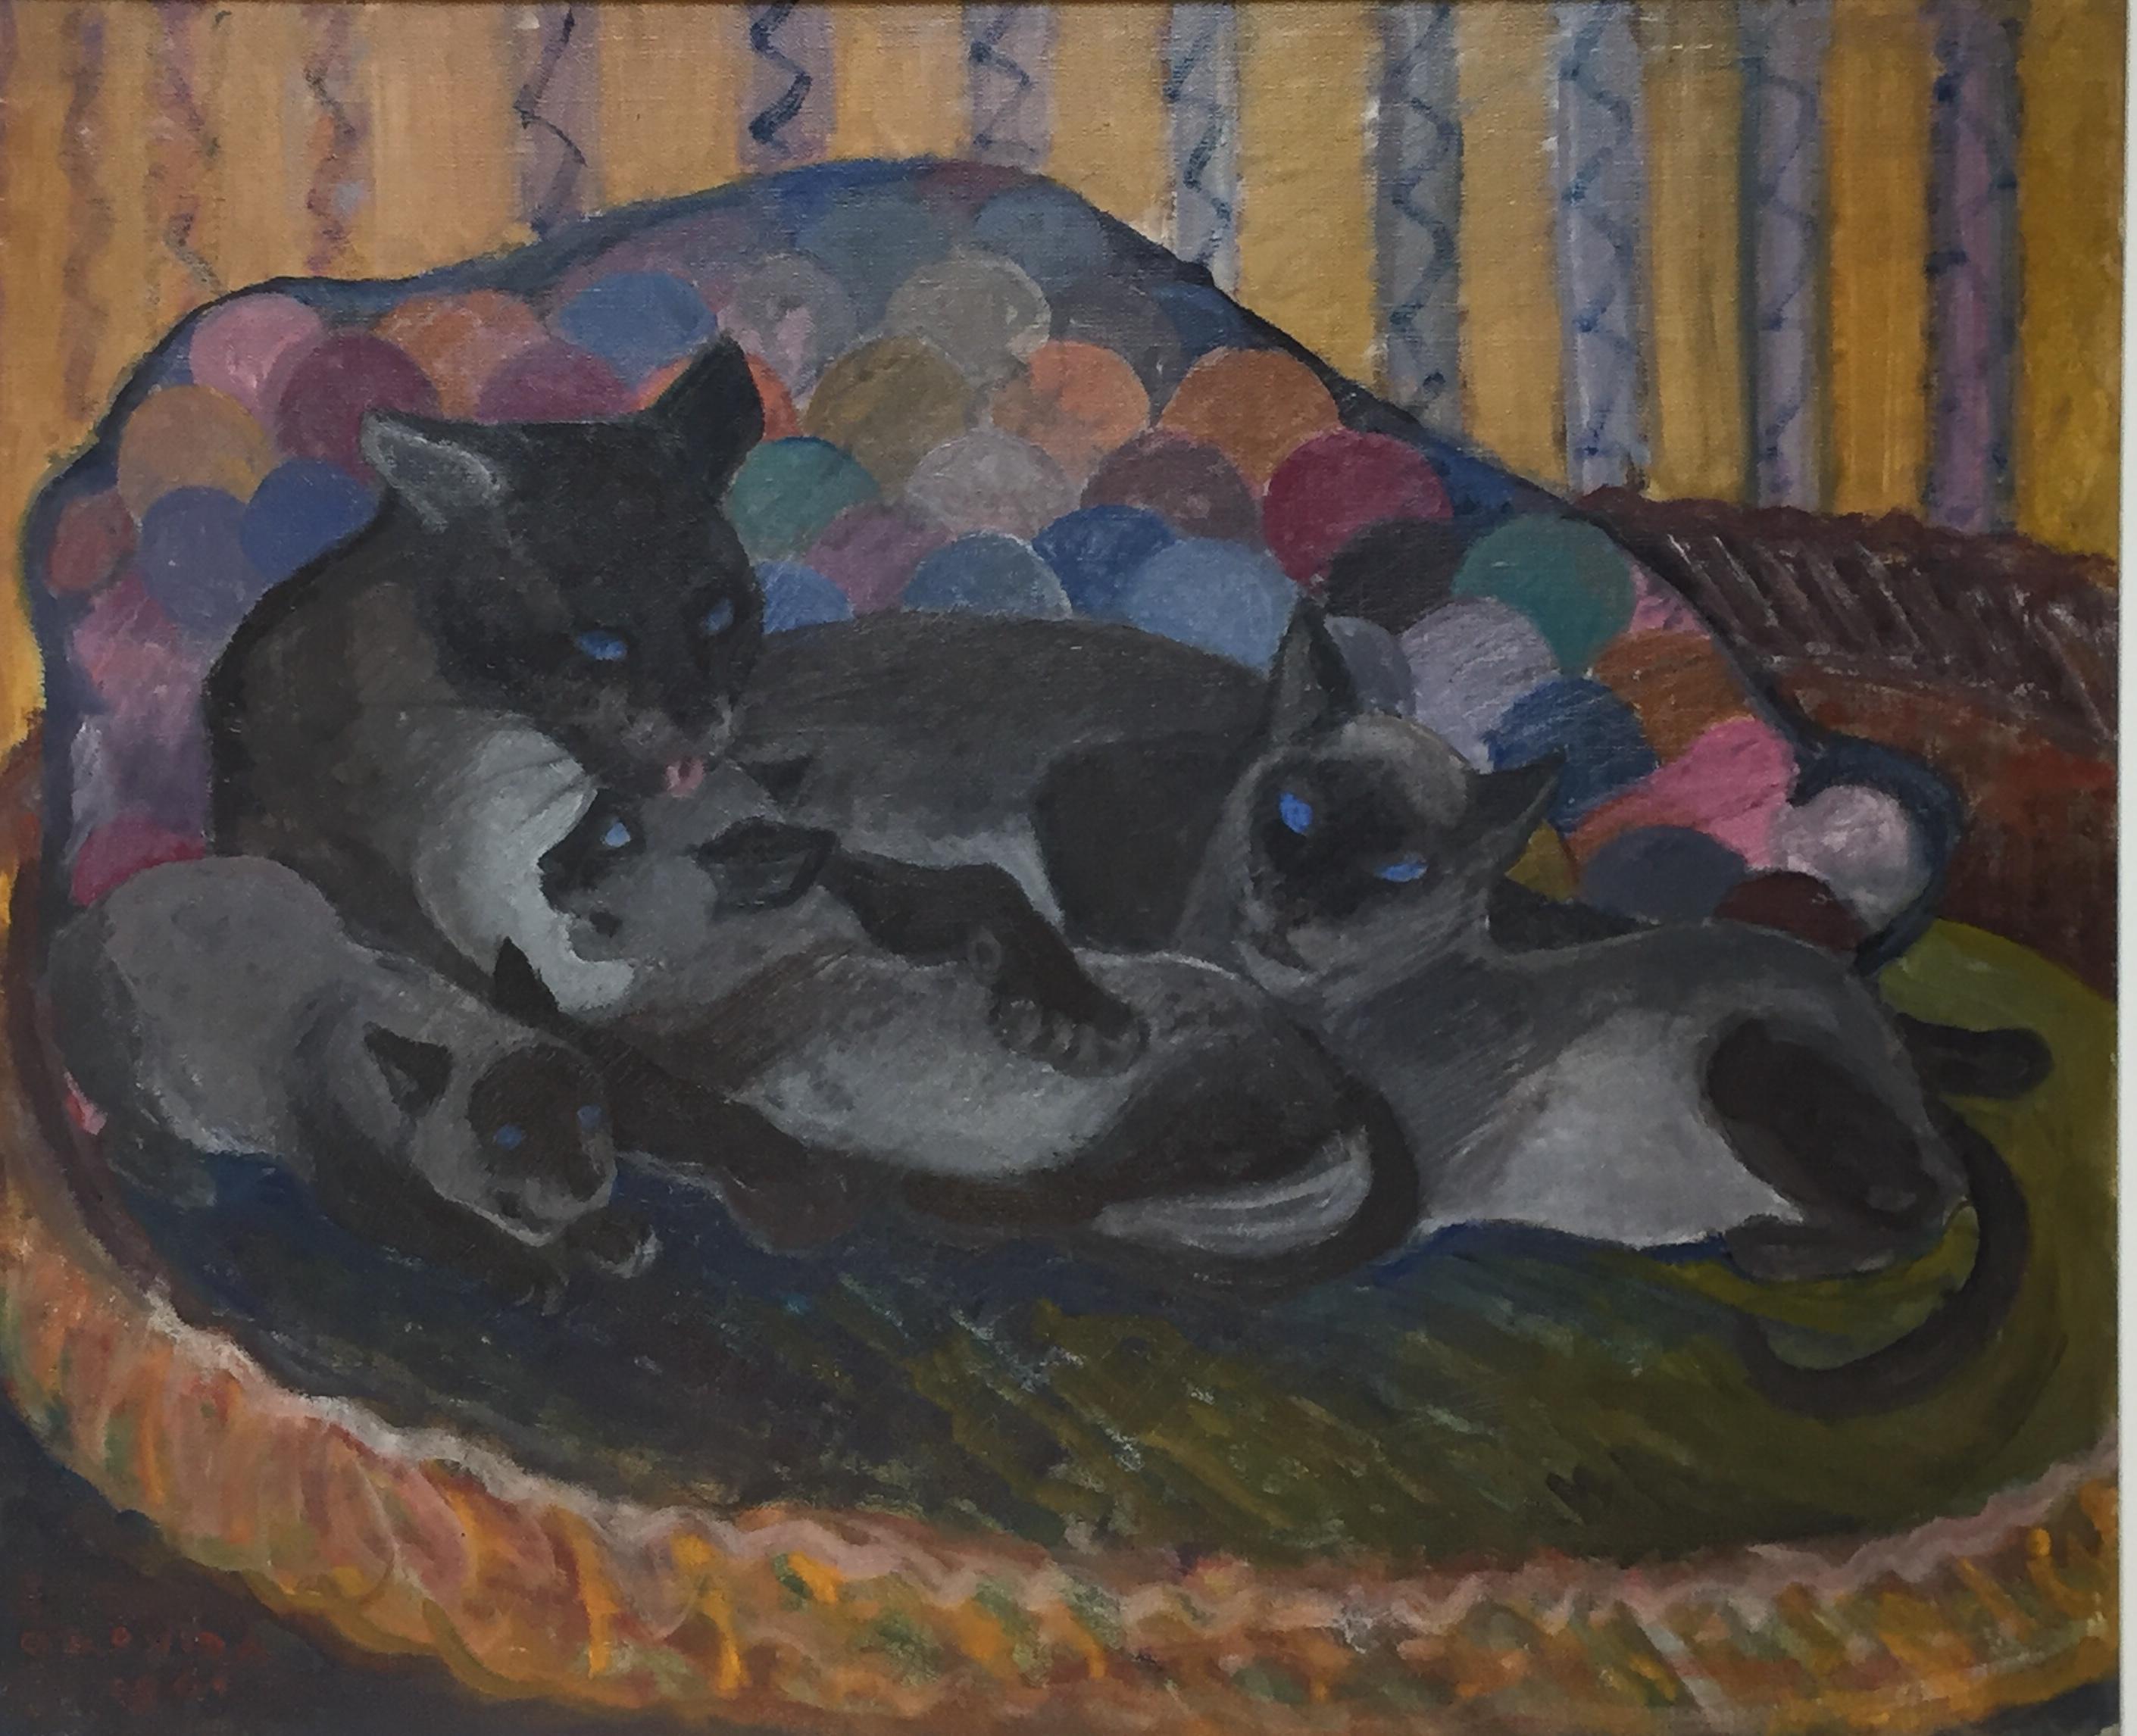 This beautiful oil painting of a Siamese cat with her three kittens by Orovida Pissarro is signed and dated 1961, and has been authenticated by Lélia Pissarro; the certificate (see image) is embossed with the Company's stamp "Pissarro Stern